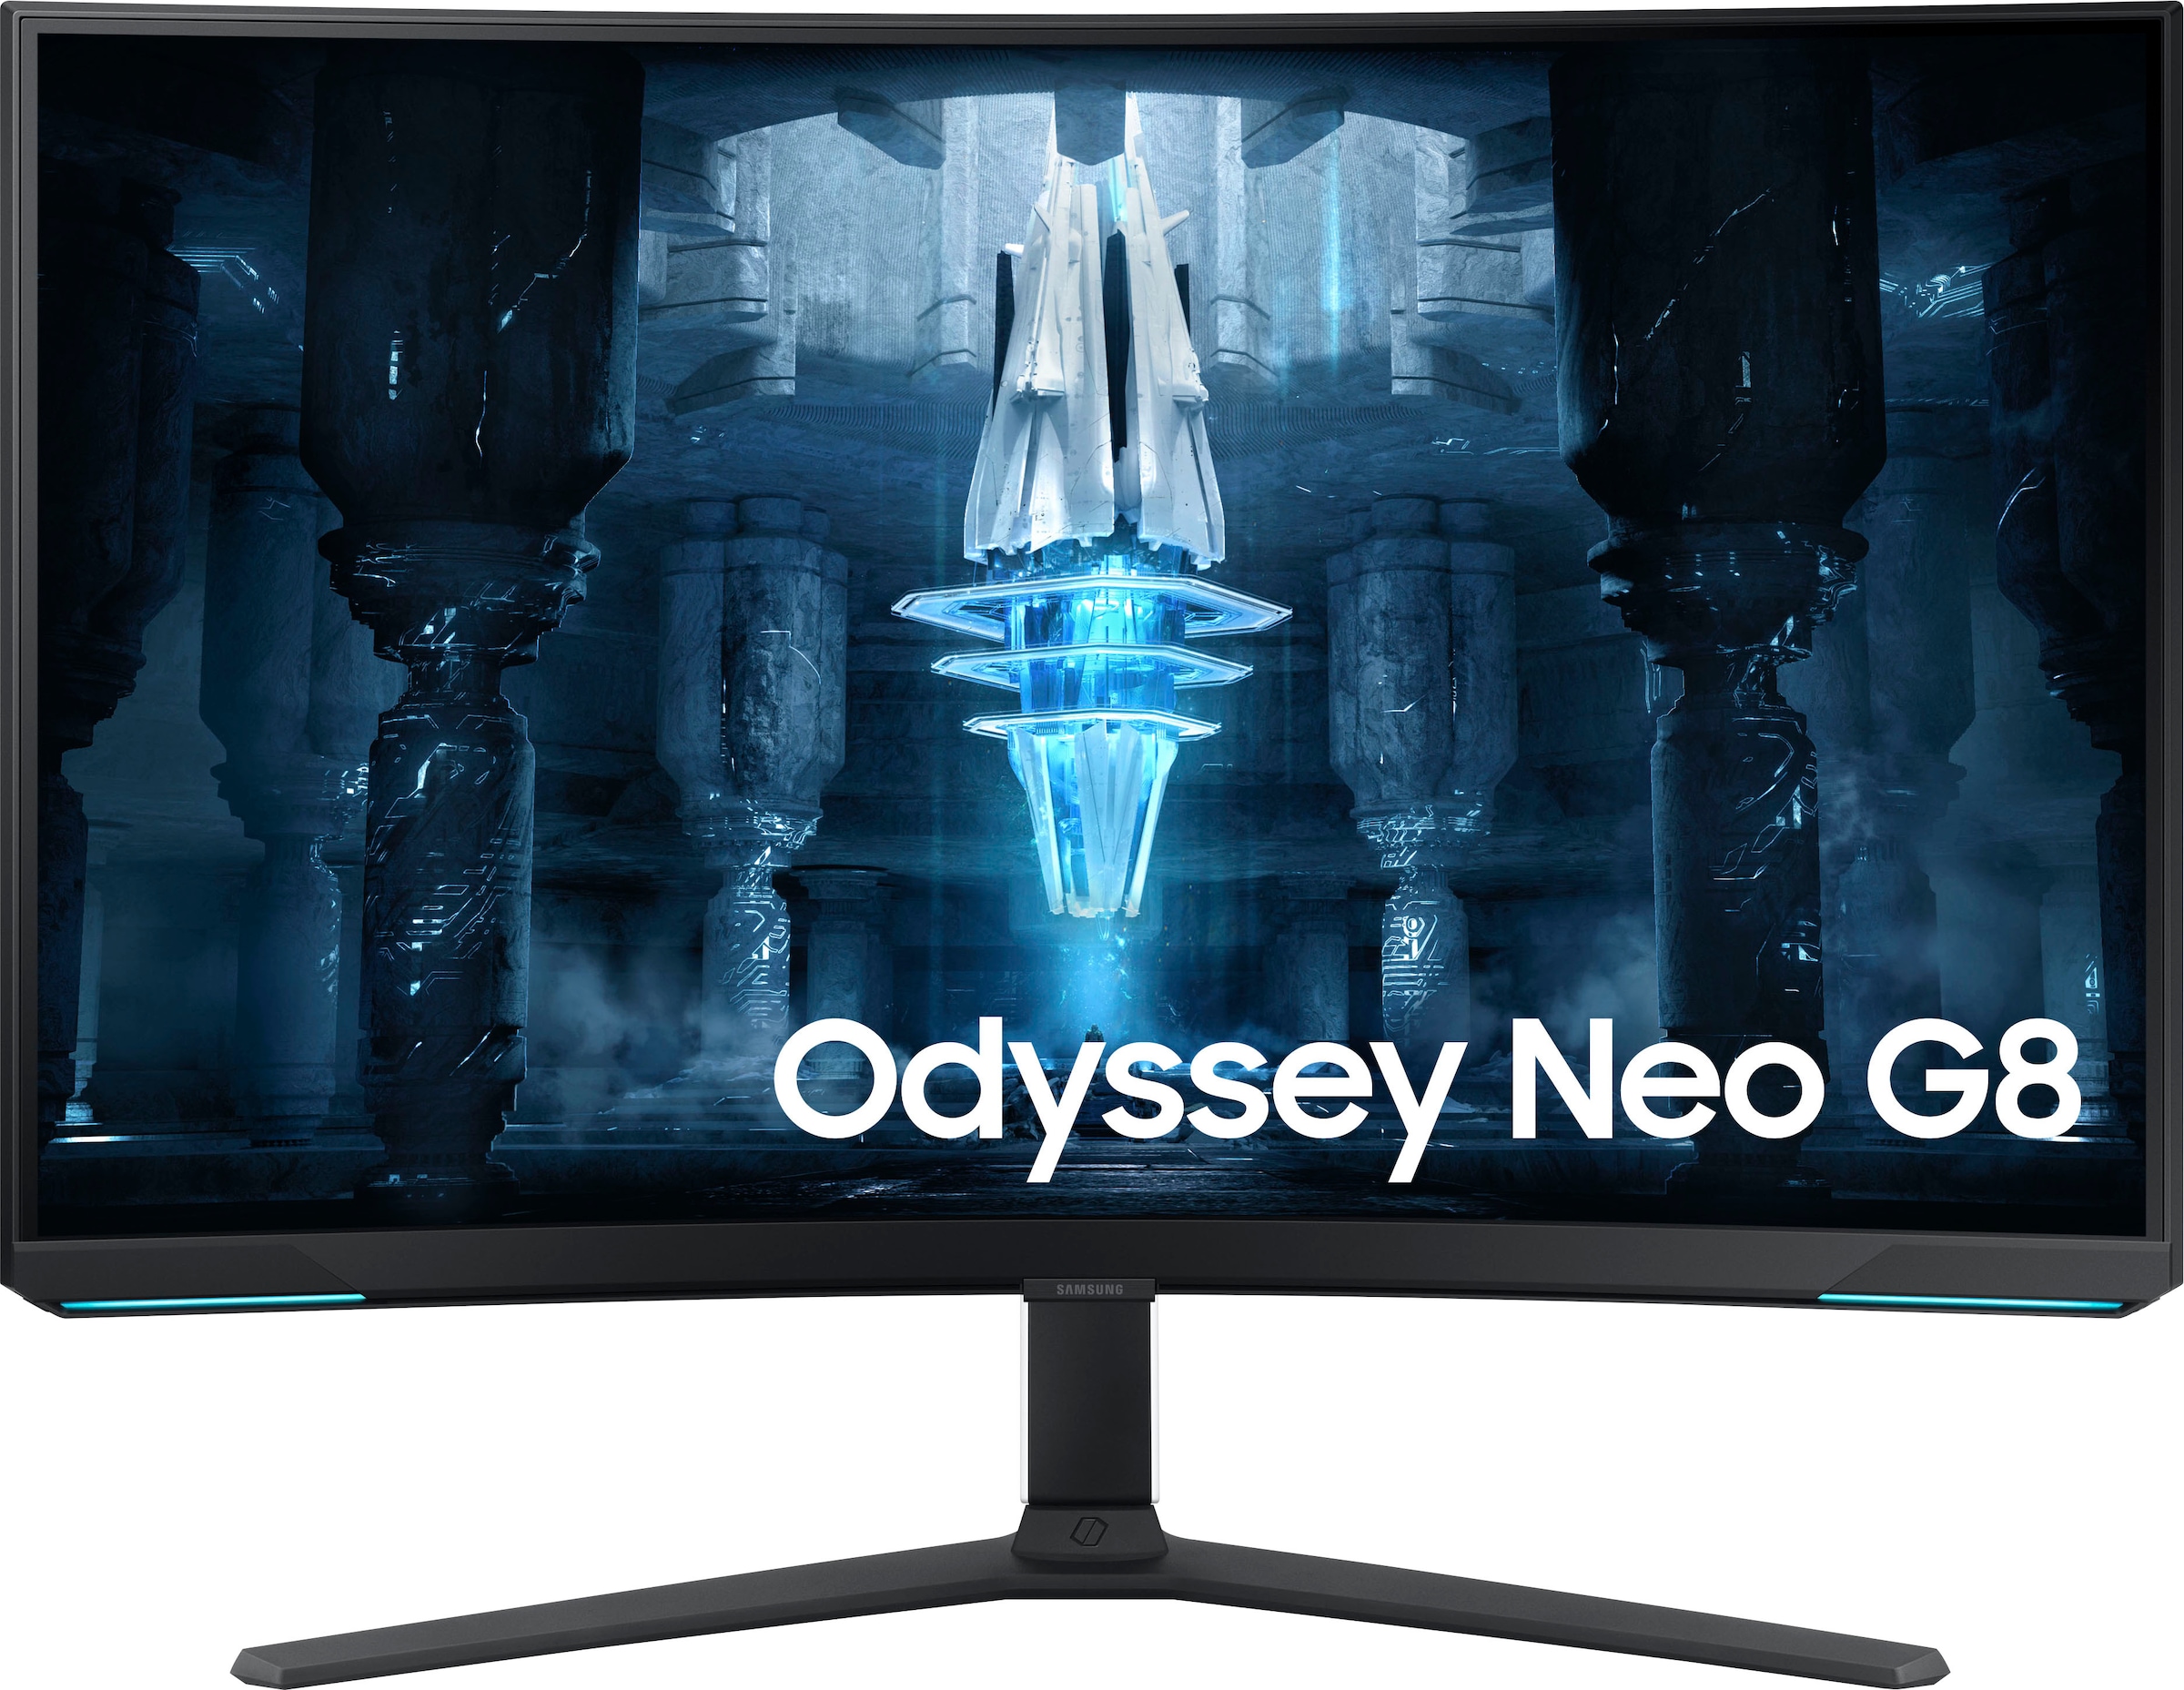 Samsung Curved-Gaming-LED-Monitor »Odyssey Neo G8 S32BG850NP«, 81 cm/32 Zoll, 3840 x 2160 px, 4K Ultra HD, 1 ms Reaktionszeit, 165 Hz, 1ms (G/G)